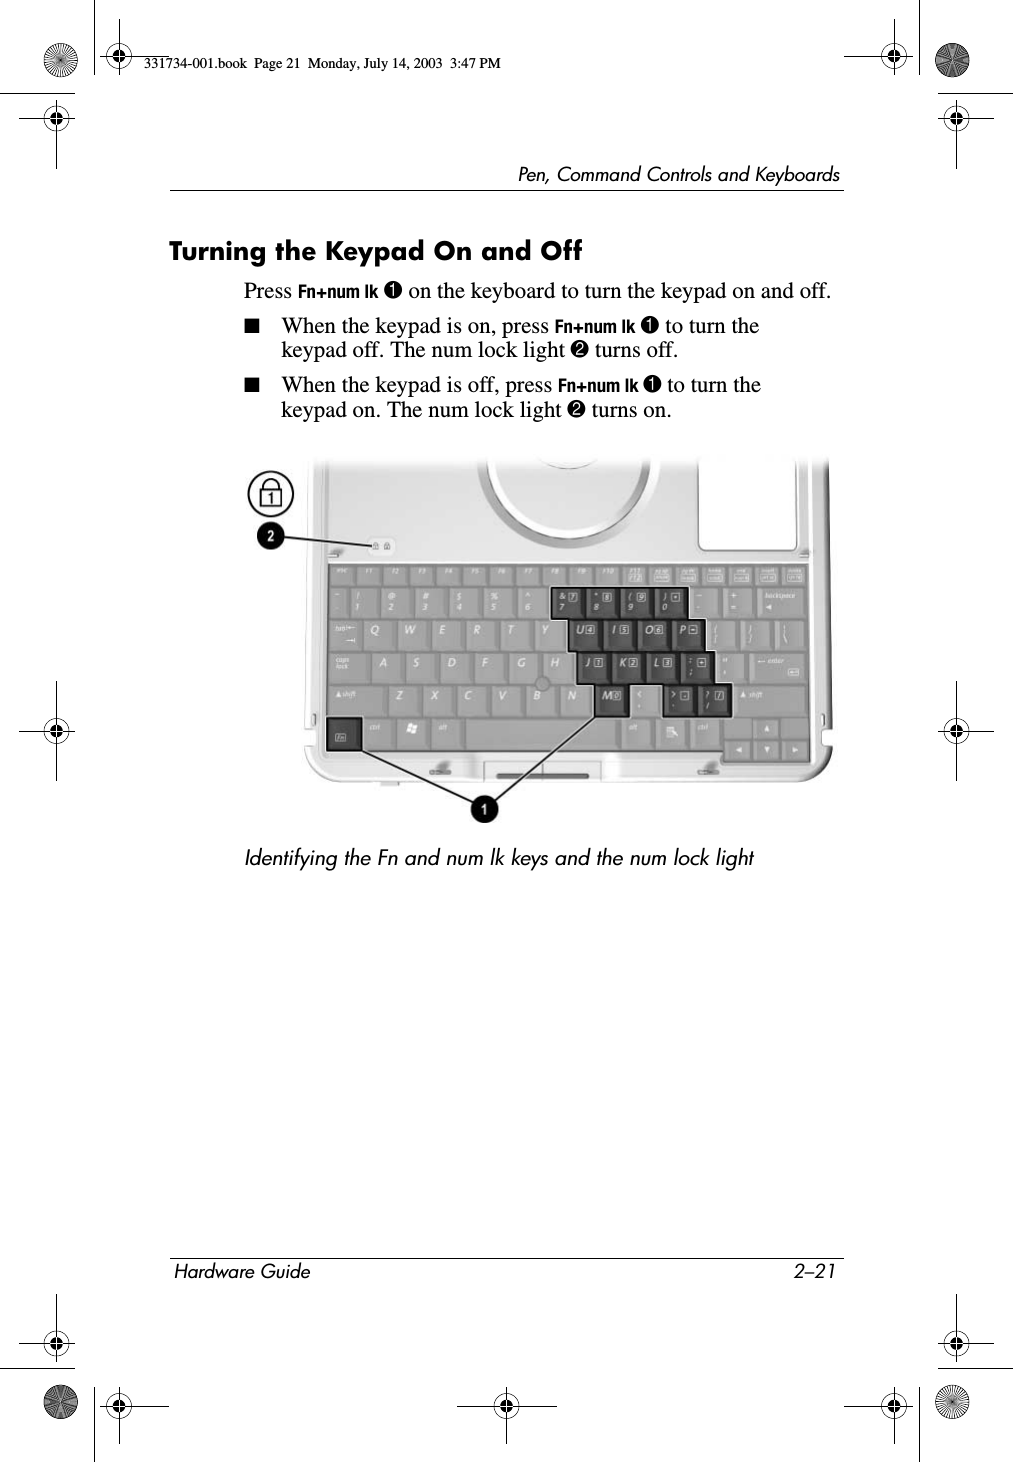 Pen, Command Controls and KeyboardsHardware Guide 2–21Turning the Keypad On and OffPress Fn+num lk 1 on the keyboard to turn the keypad on and off.■When the keypad is on, press Fn+num lk 1 to turn the keypad off. The num lock light 2 turns off.■When the keypad is off, press Fn+num lk 1 to turn the keypad on. The num lock light 2 turns on.Identifying the Fn and num lk keys and the num lock light331734-001.book  Page 21  Monday, July 14, 2003  3:47 PM